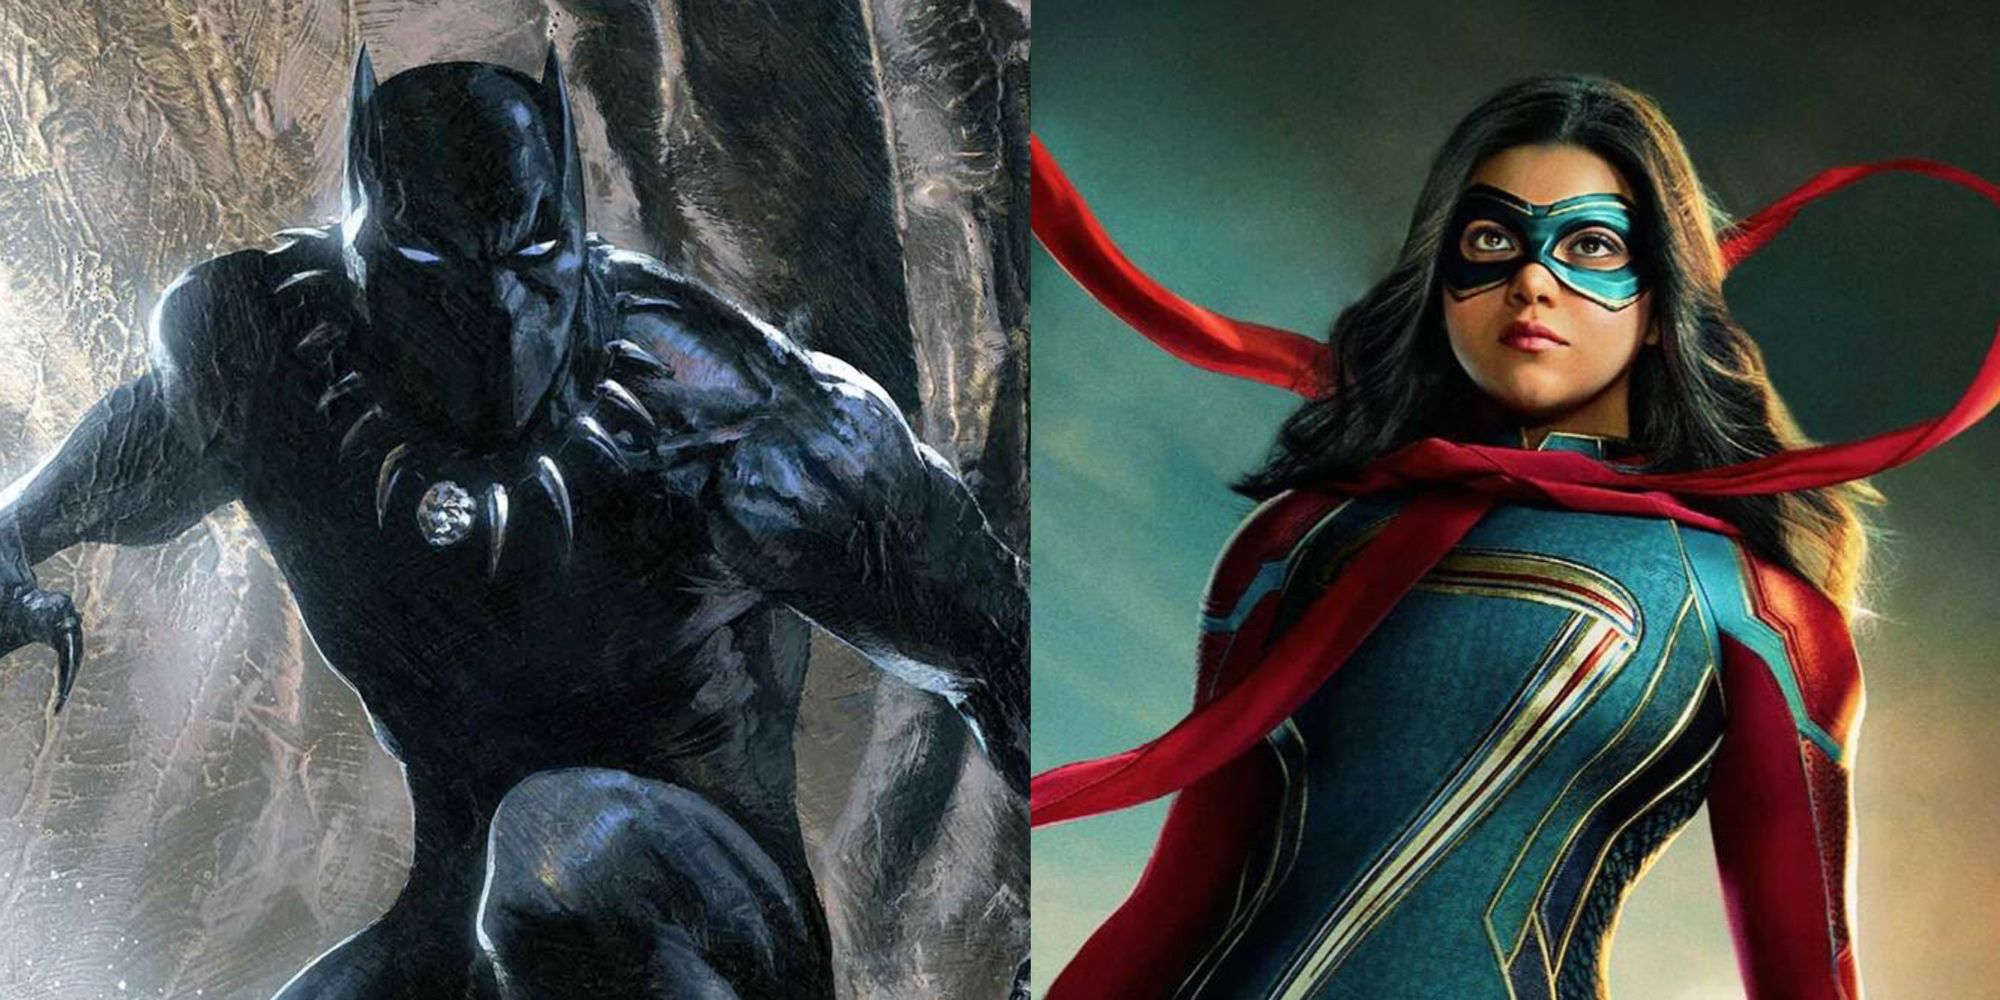 Collage of Black Panther and Mrs Marvel